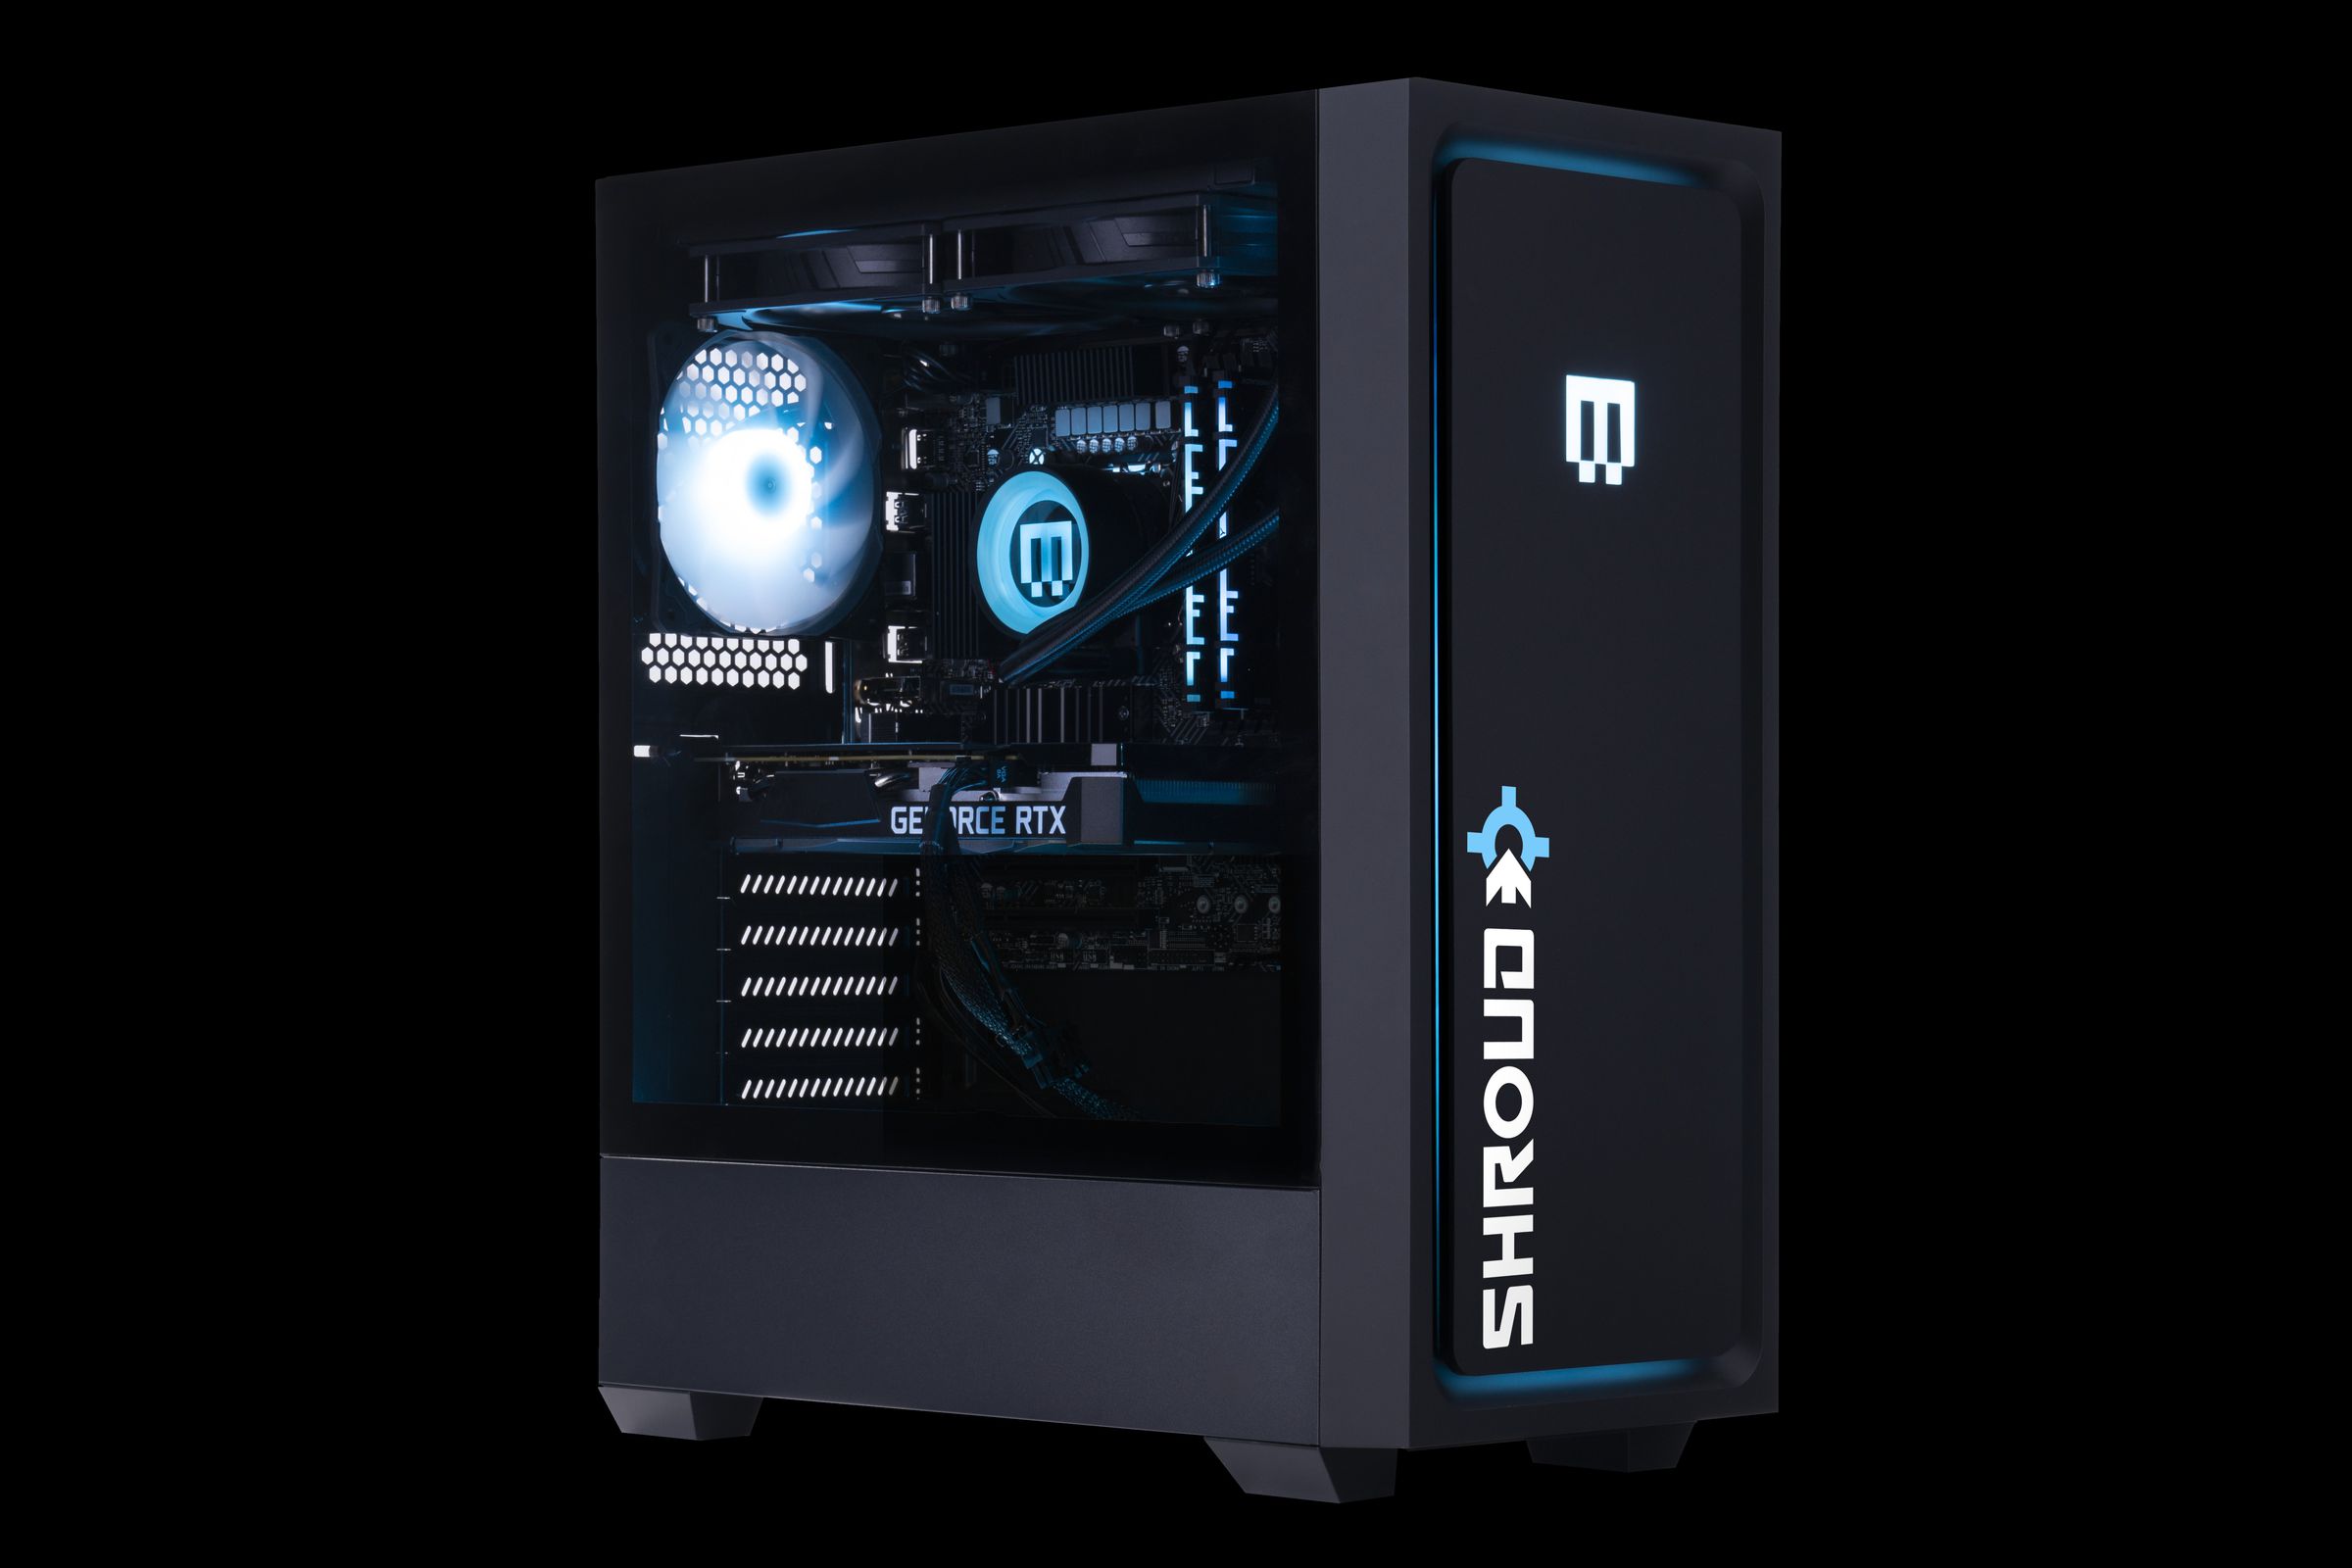 A blue-lit gaming PC with many fans on a black background with a big white Shroud logo on the front.